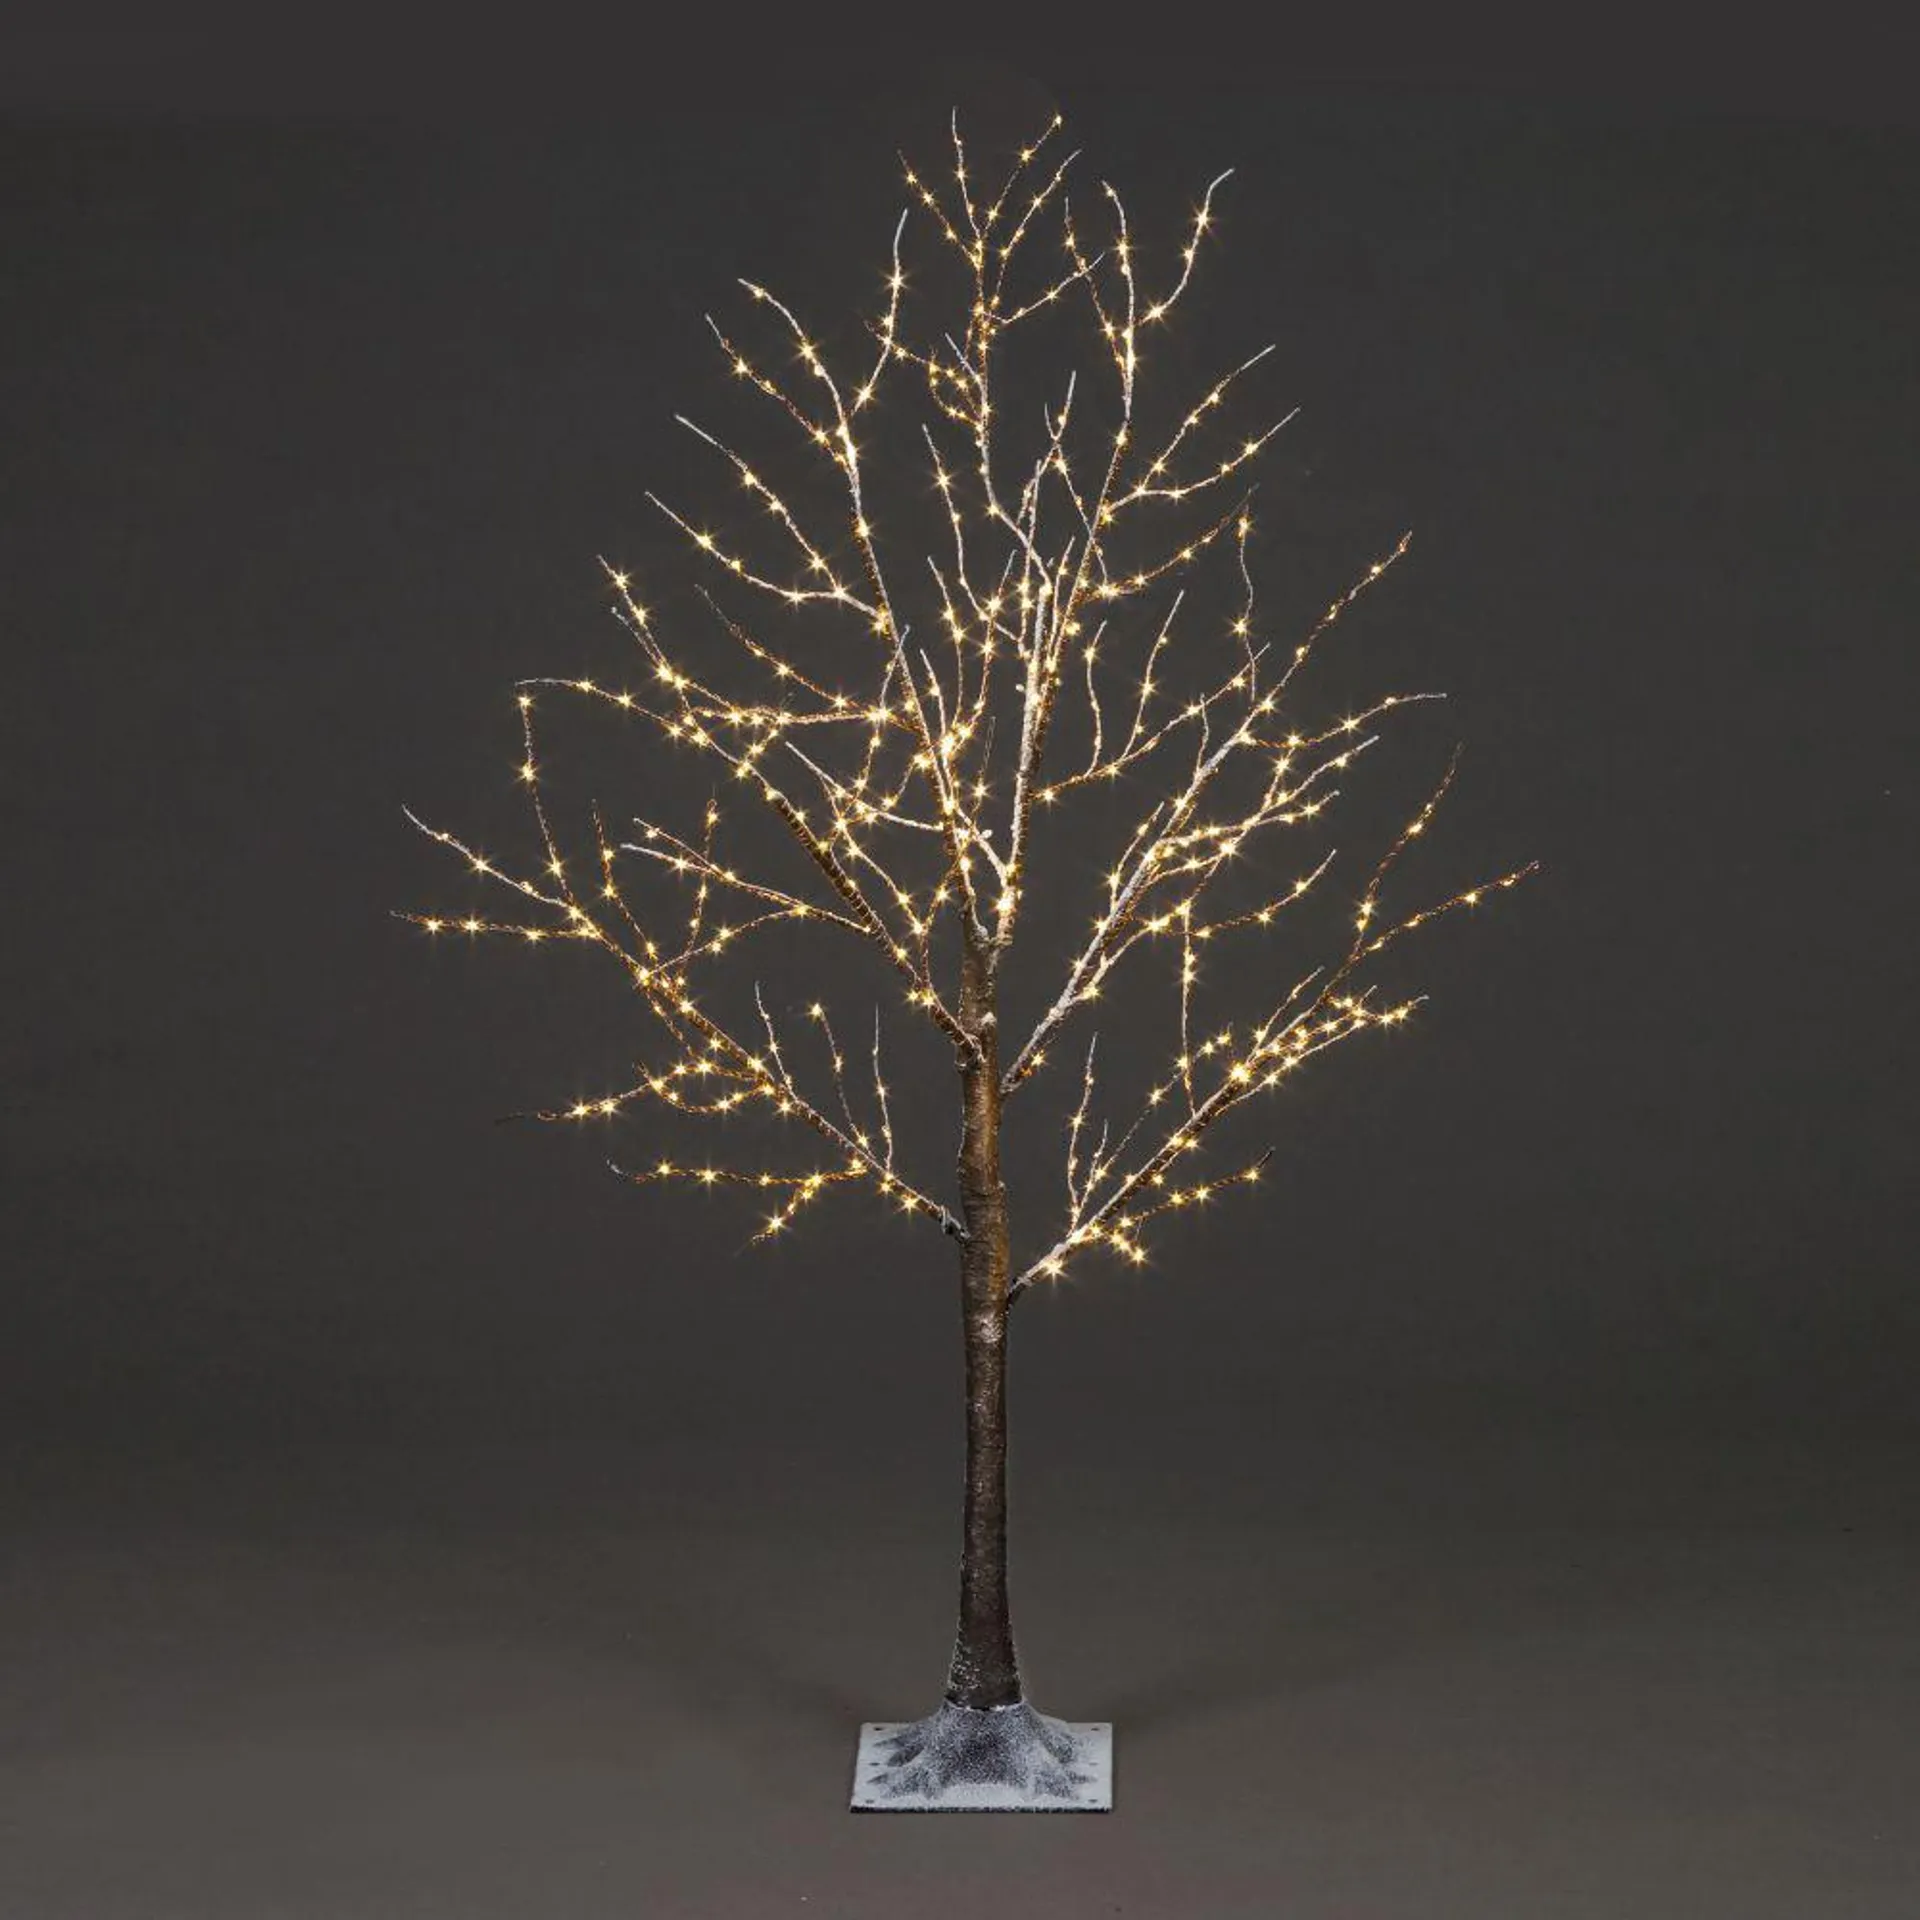 90cm Copper Wire Frosted Brown Twig Tree With 200 Warm White LEDs